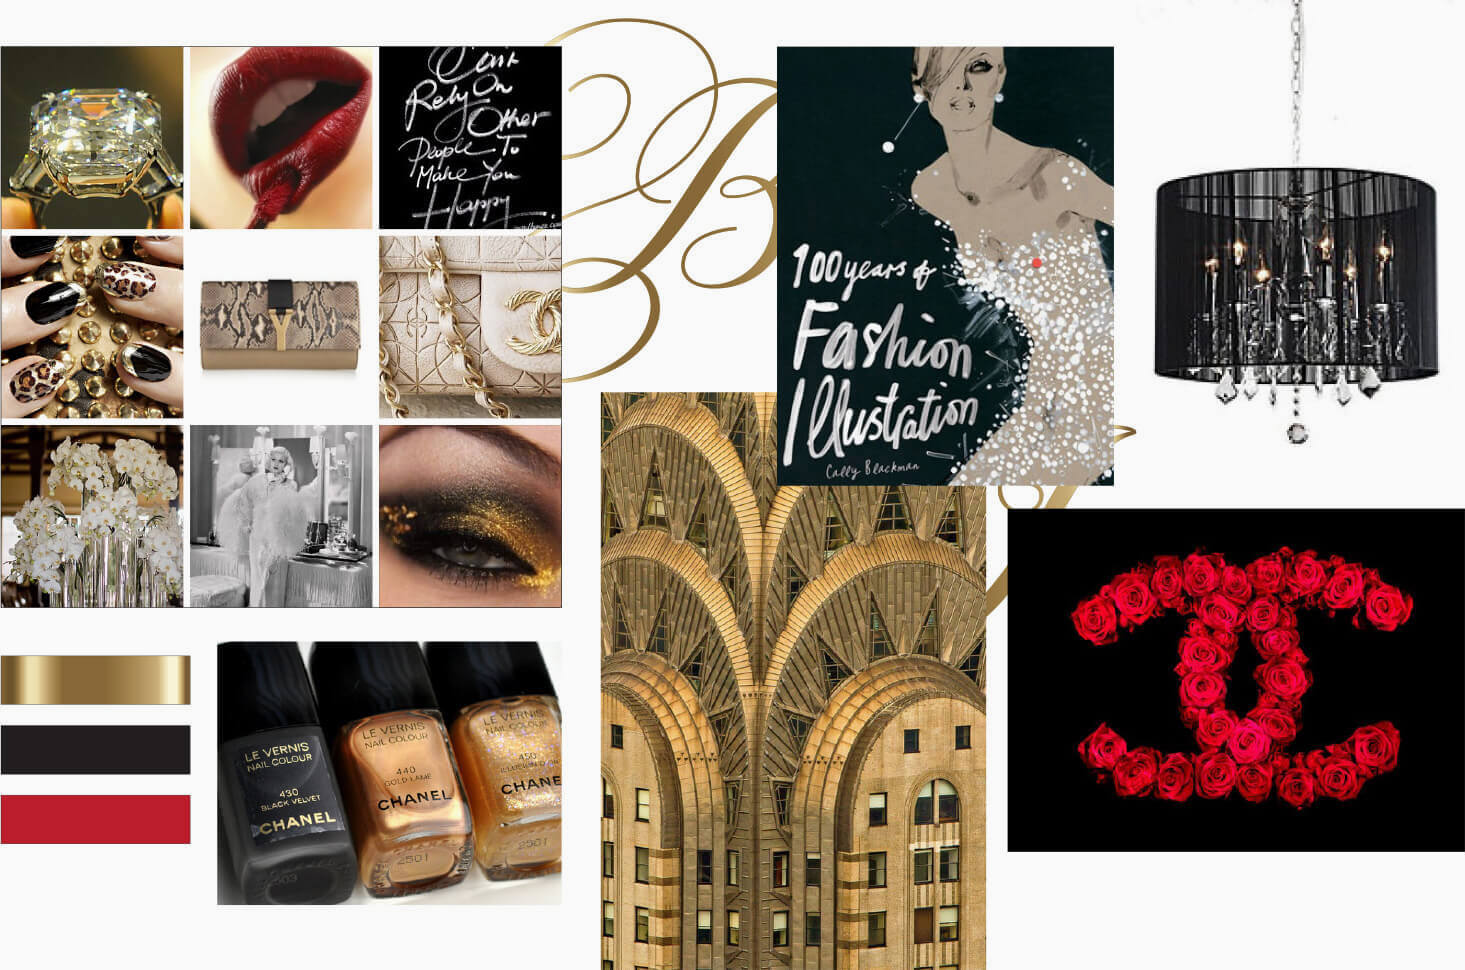 Fashion, design and Chanel inspired moodboard